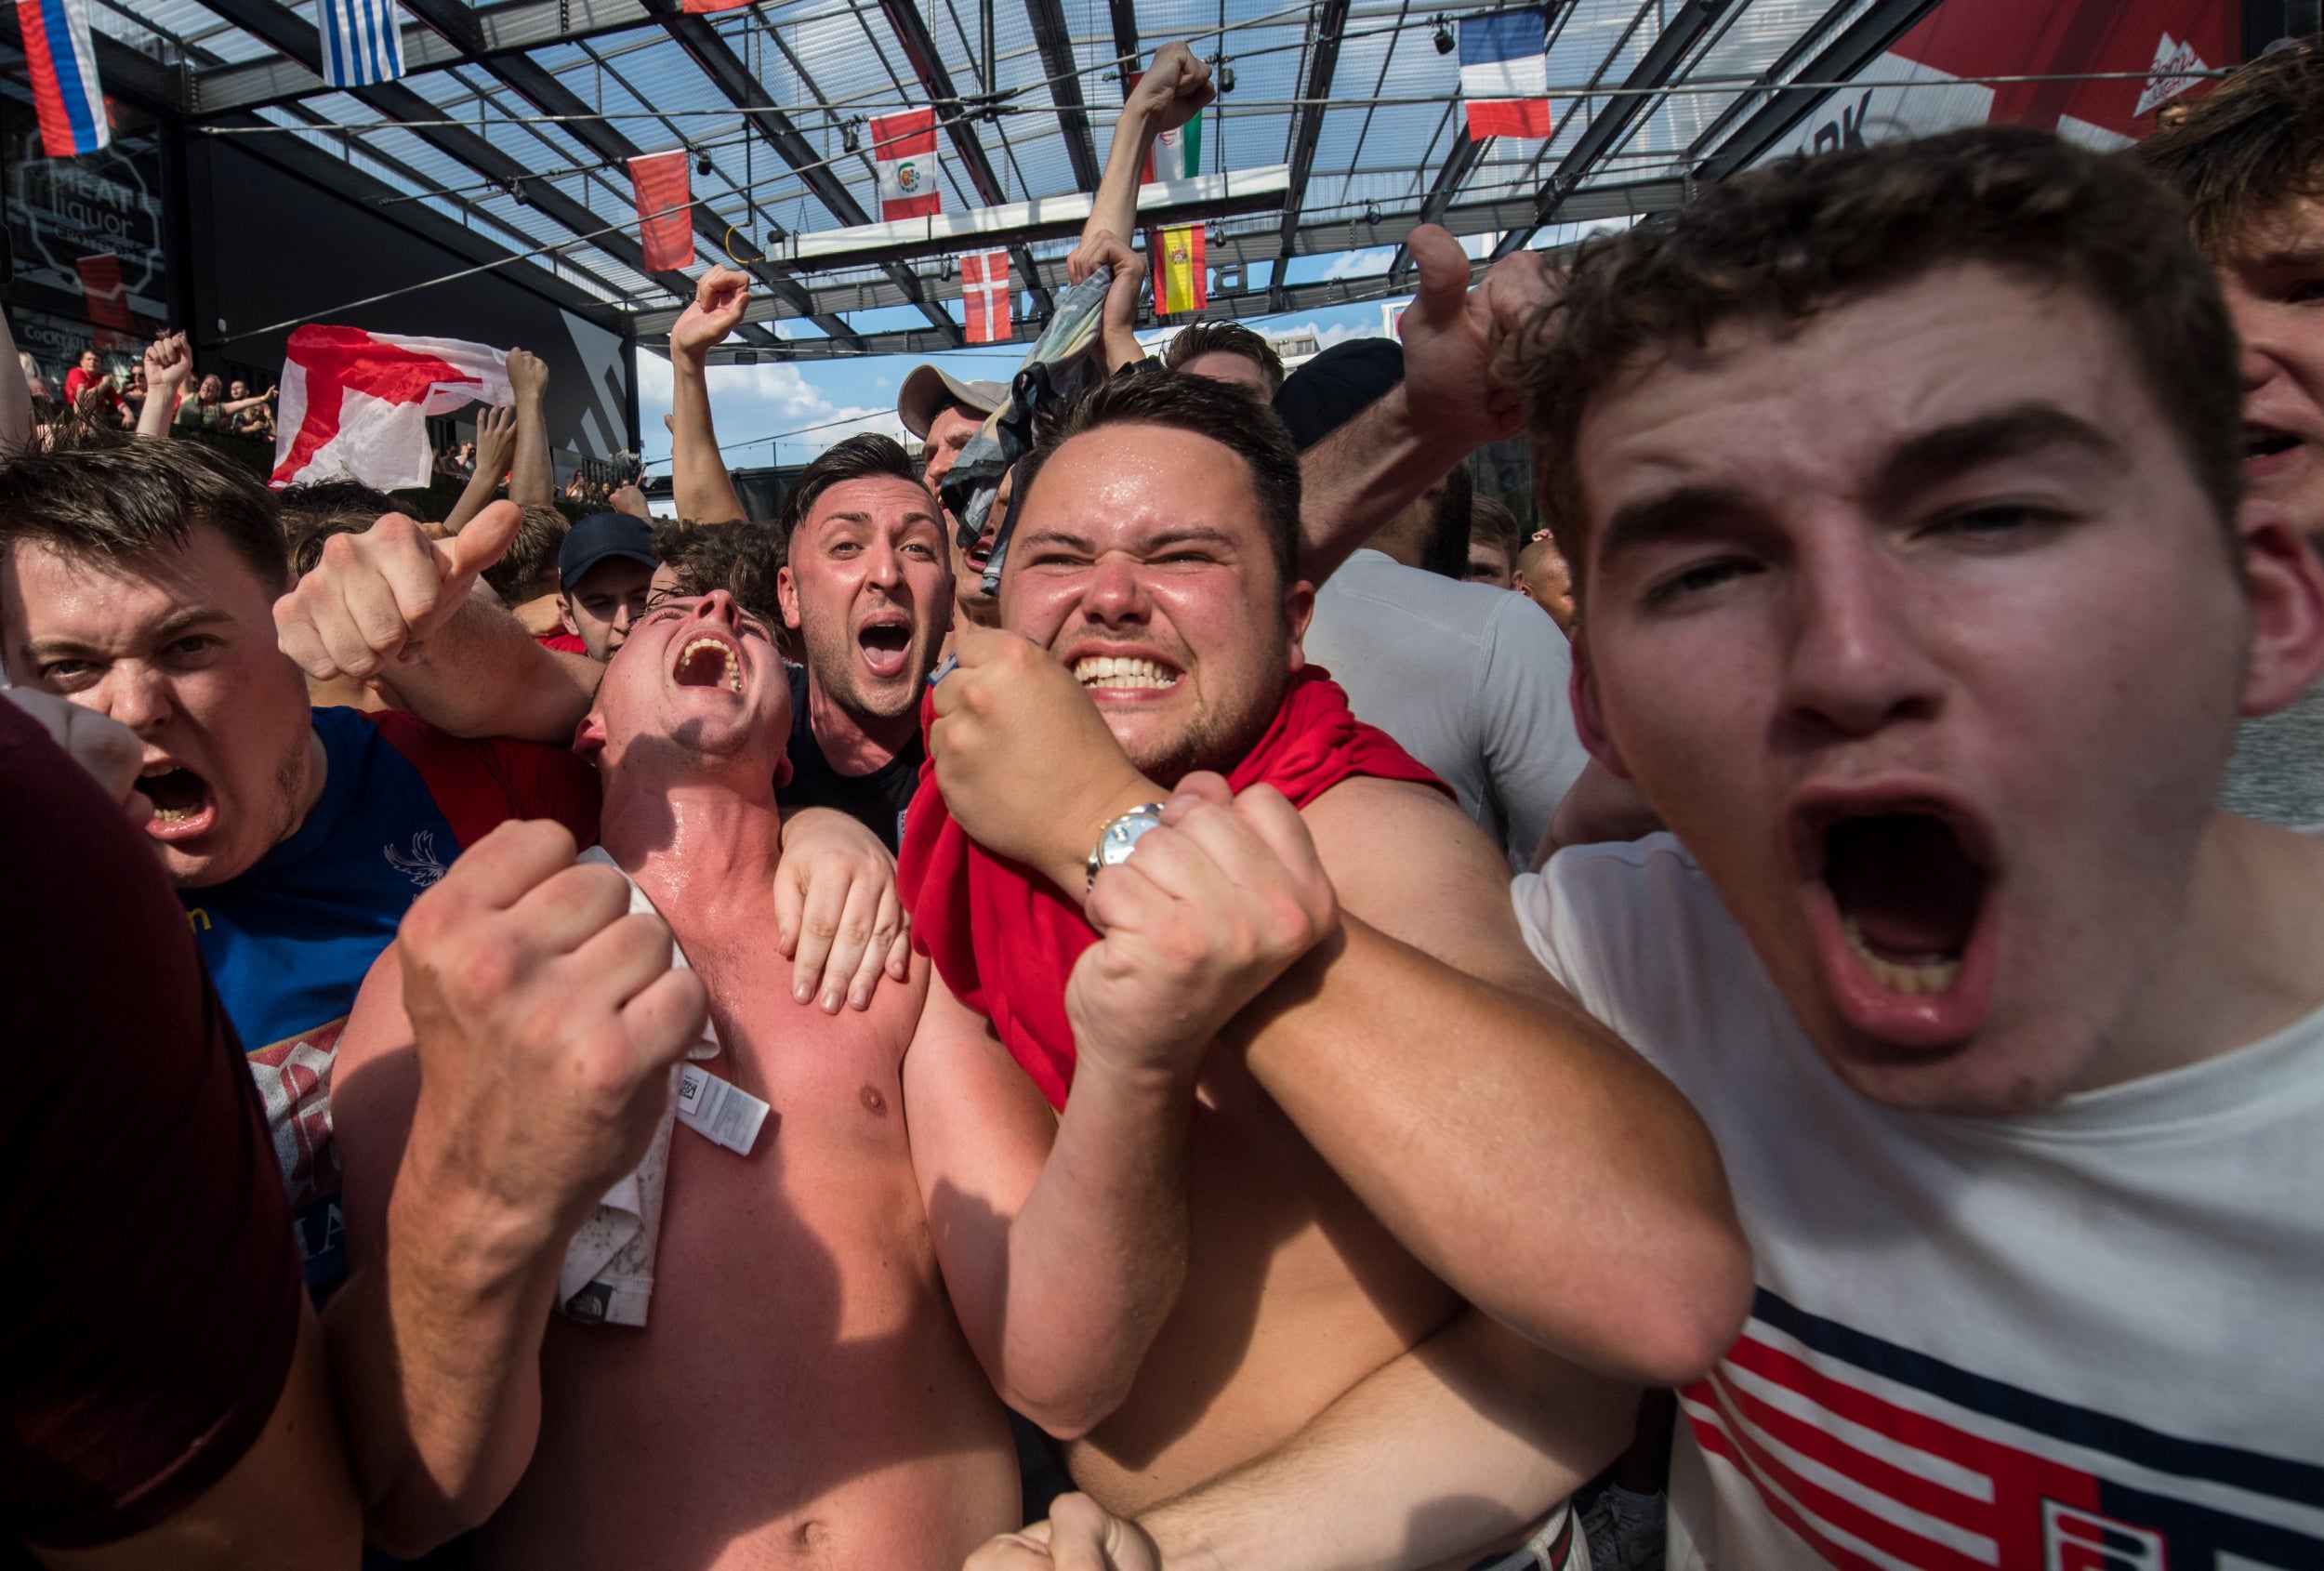 World Cup 2018: England fans warned 'don't overstep the line' ahead of semi-final